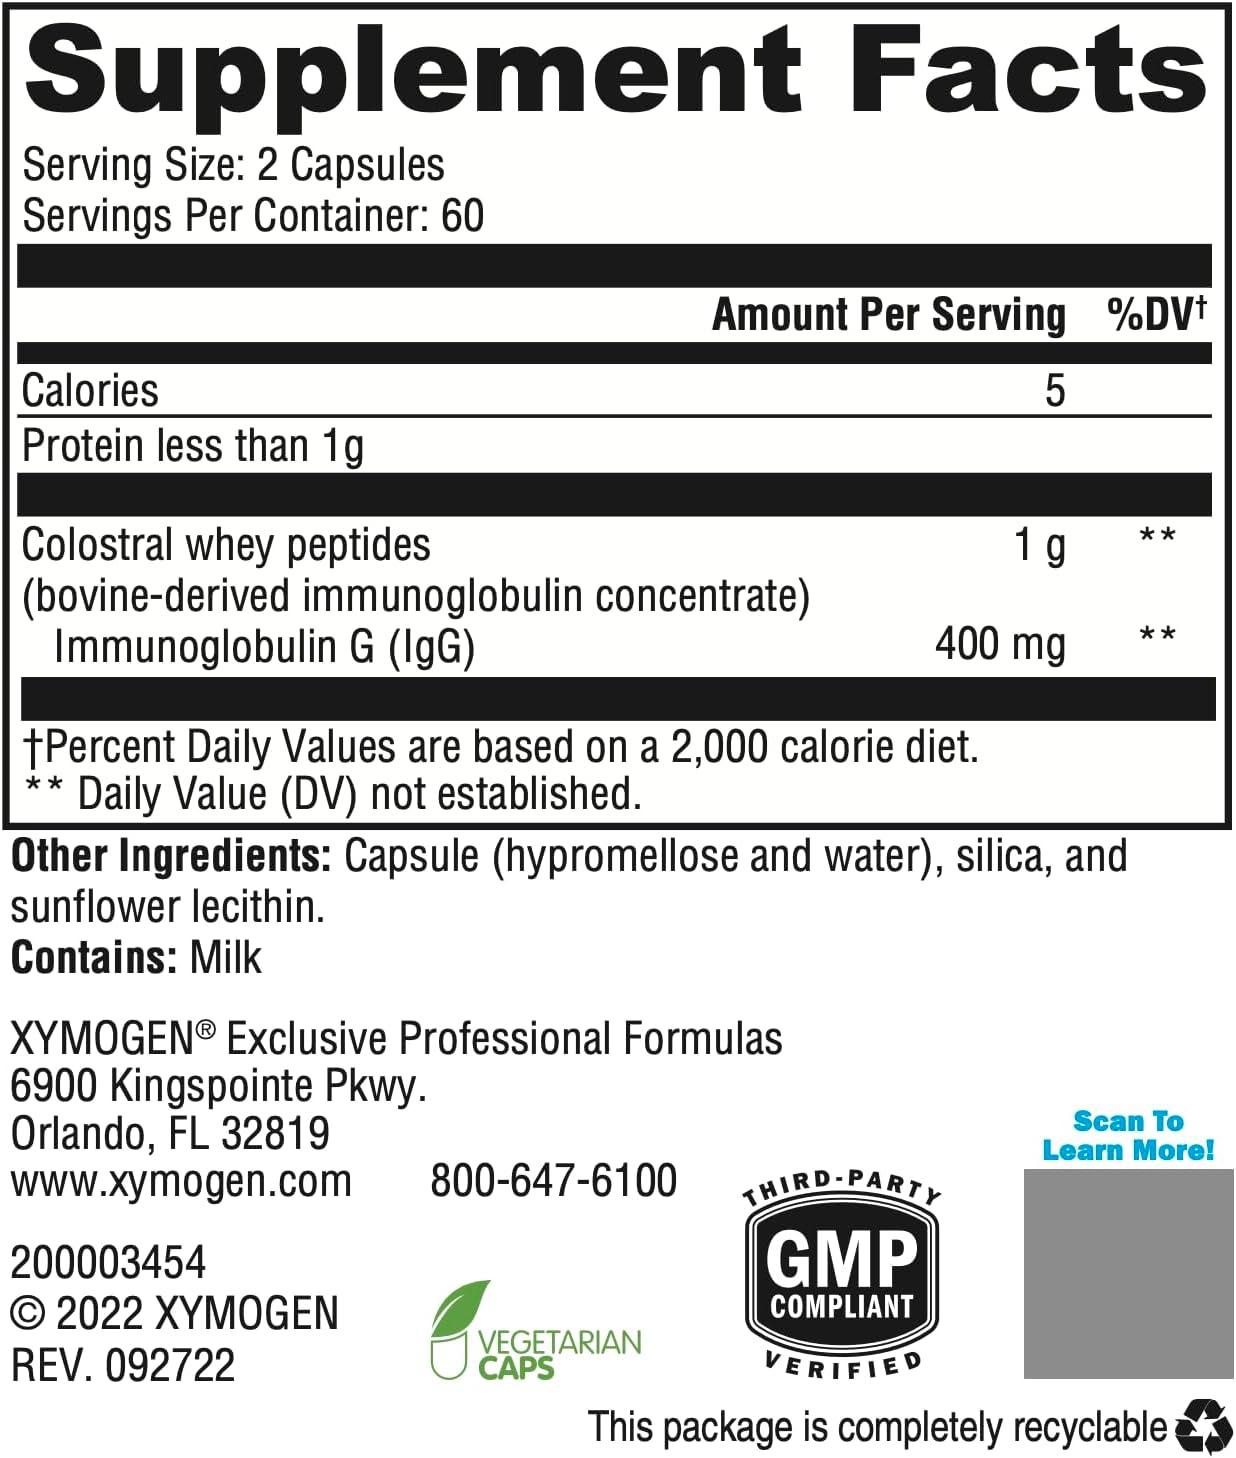 XYMOGEN IgG 2000 CWP - Immunoglobulin Concentrate (from Colostral Whey